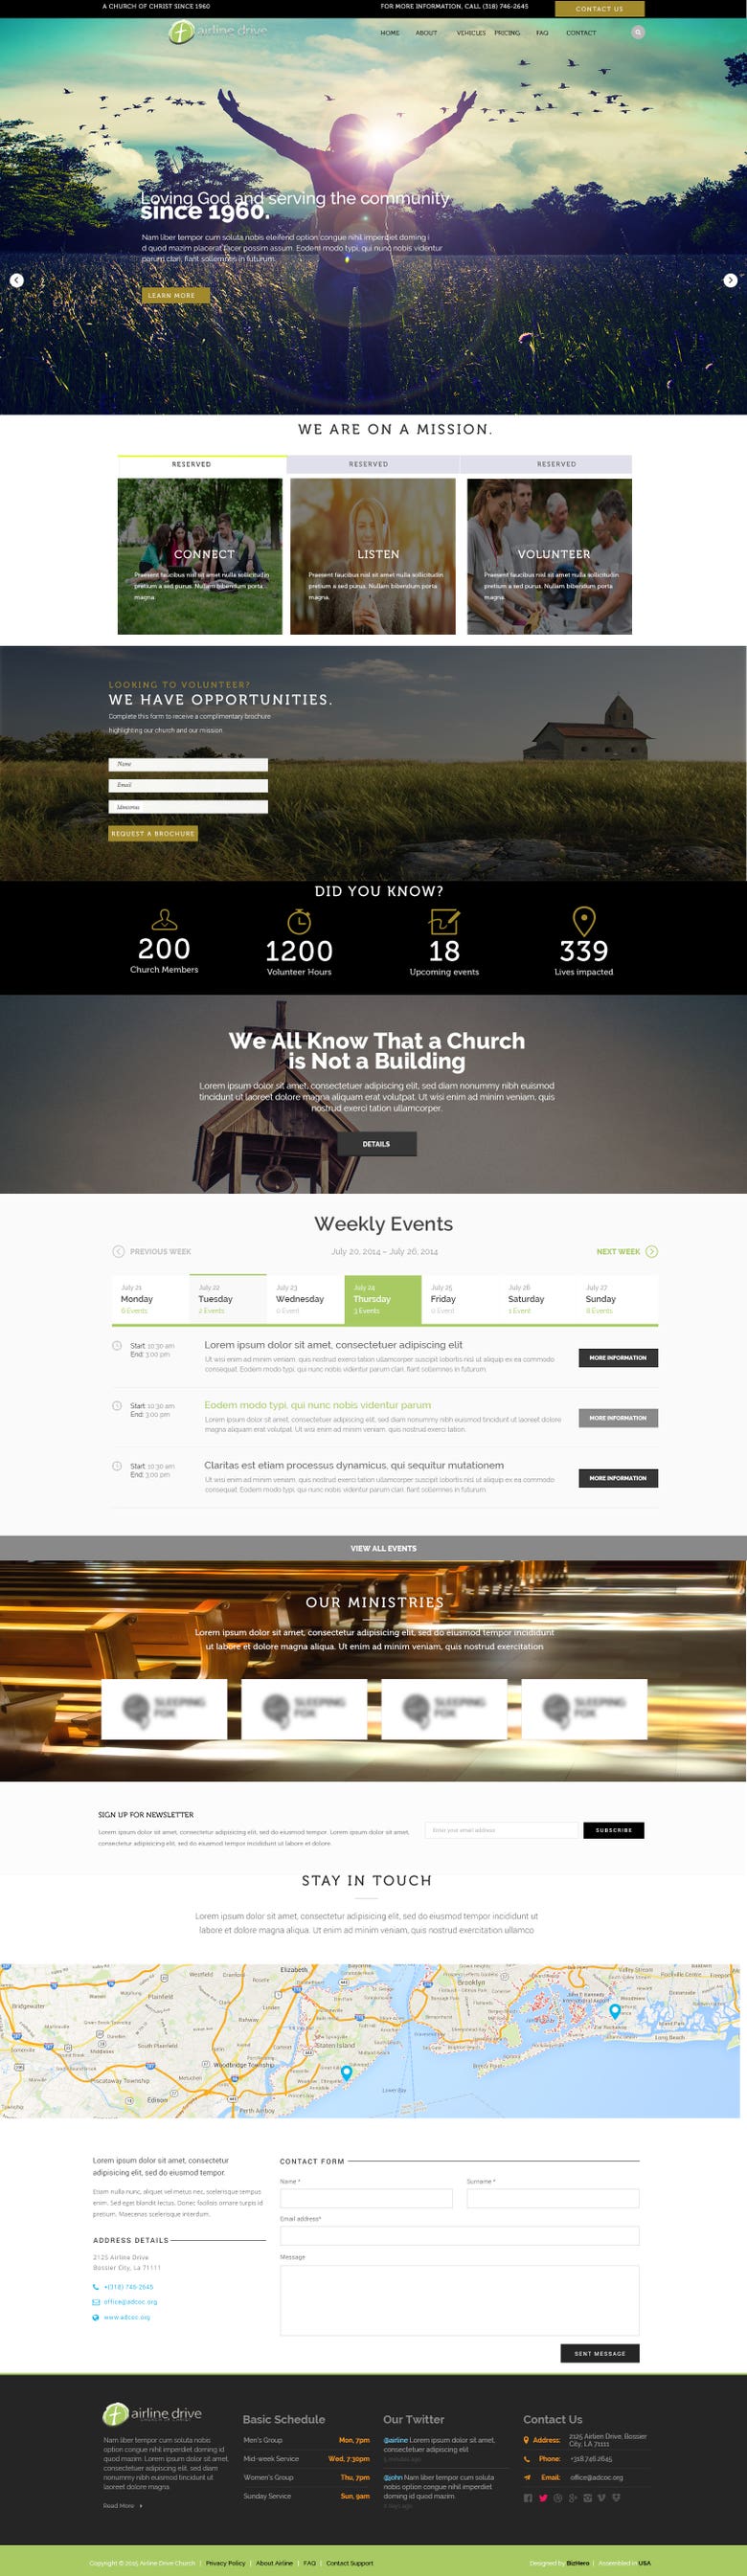 Airline Church - Website Example